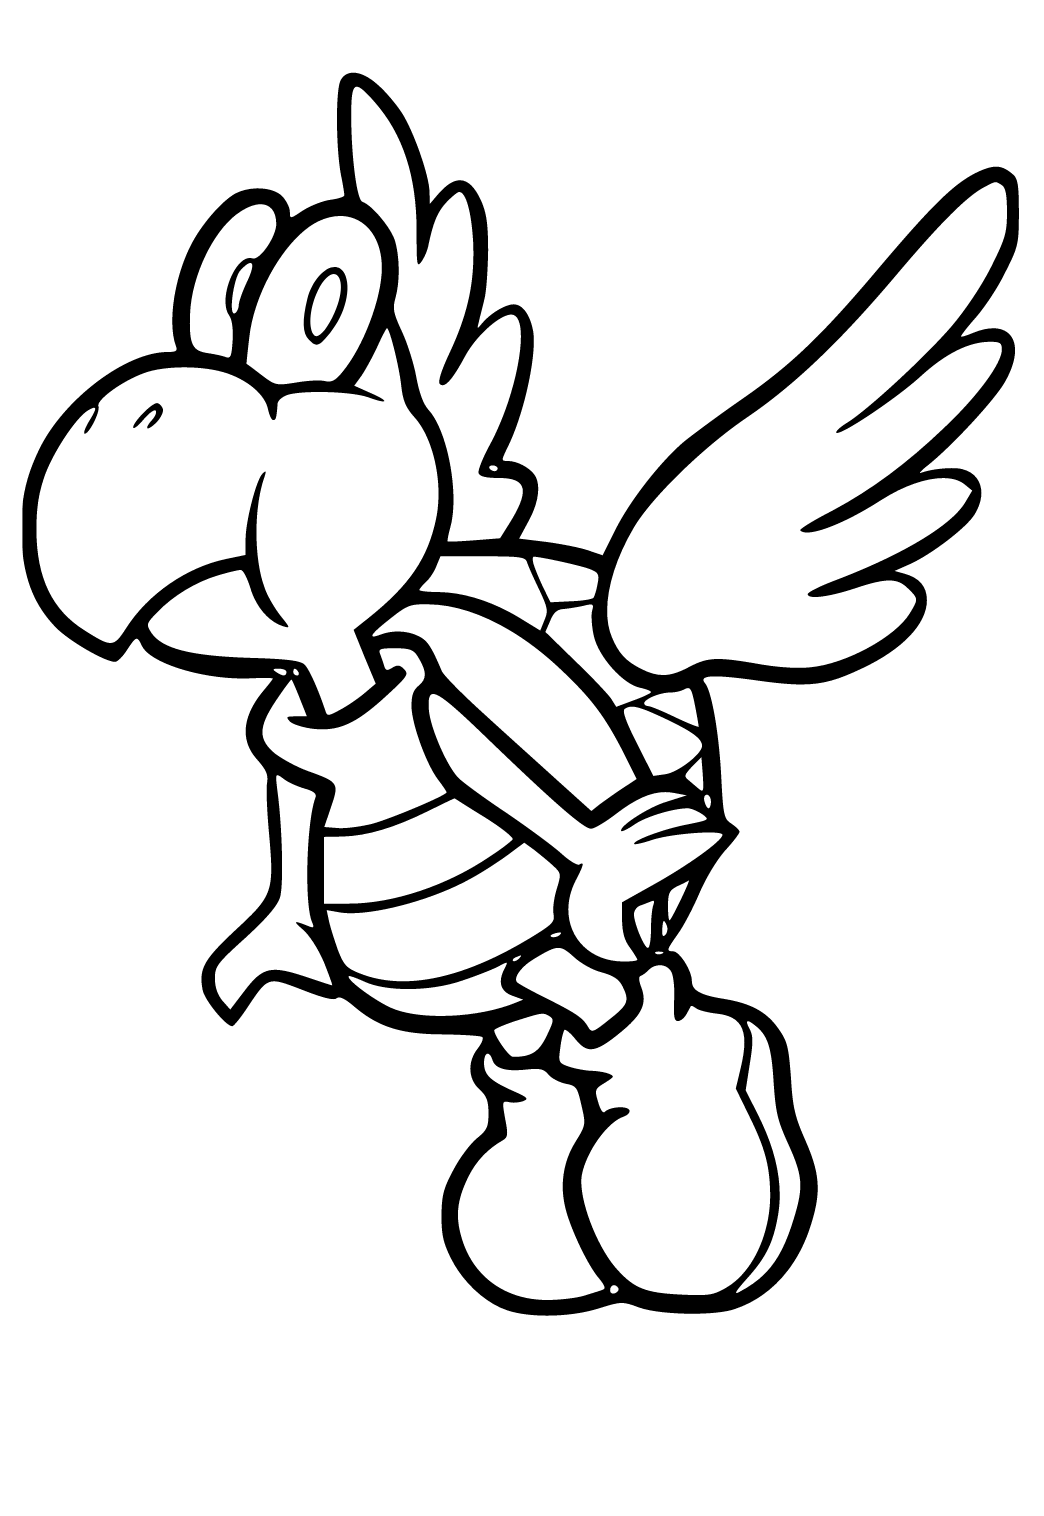 Free Printable Super Mario Koopa Coloring Page, Sheet and Picture for  Adults and Kids (Girls and Boys) - Babeled.com